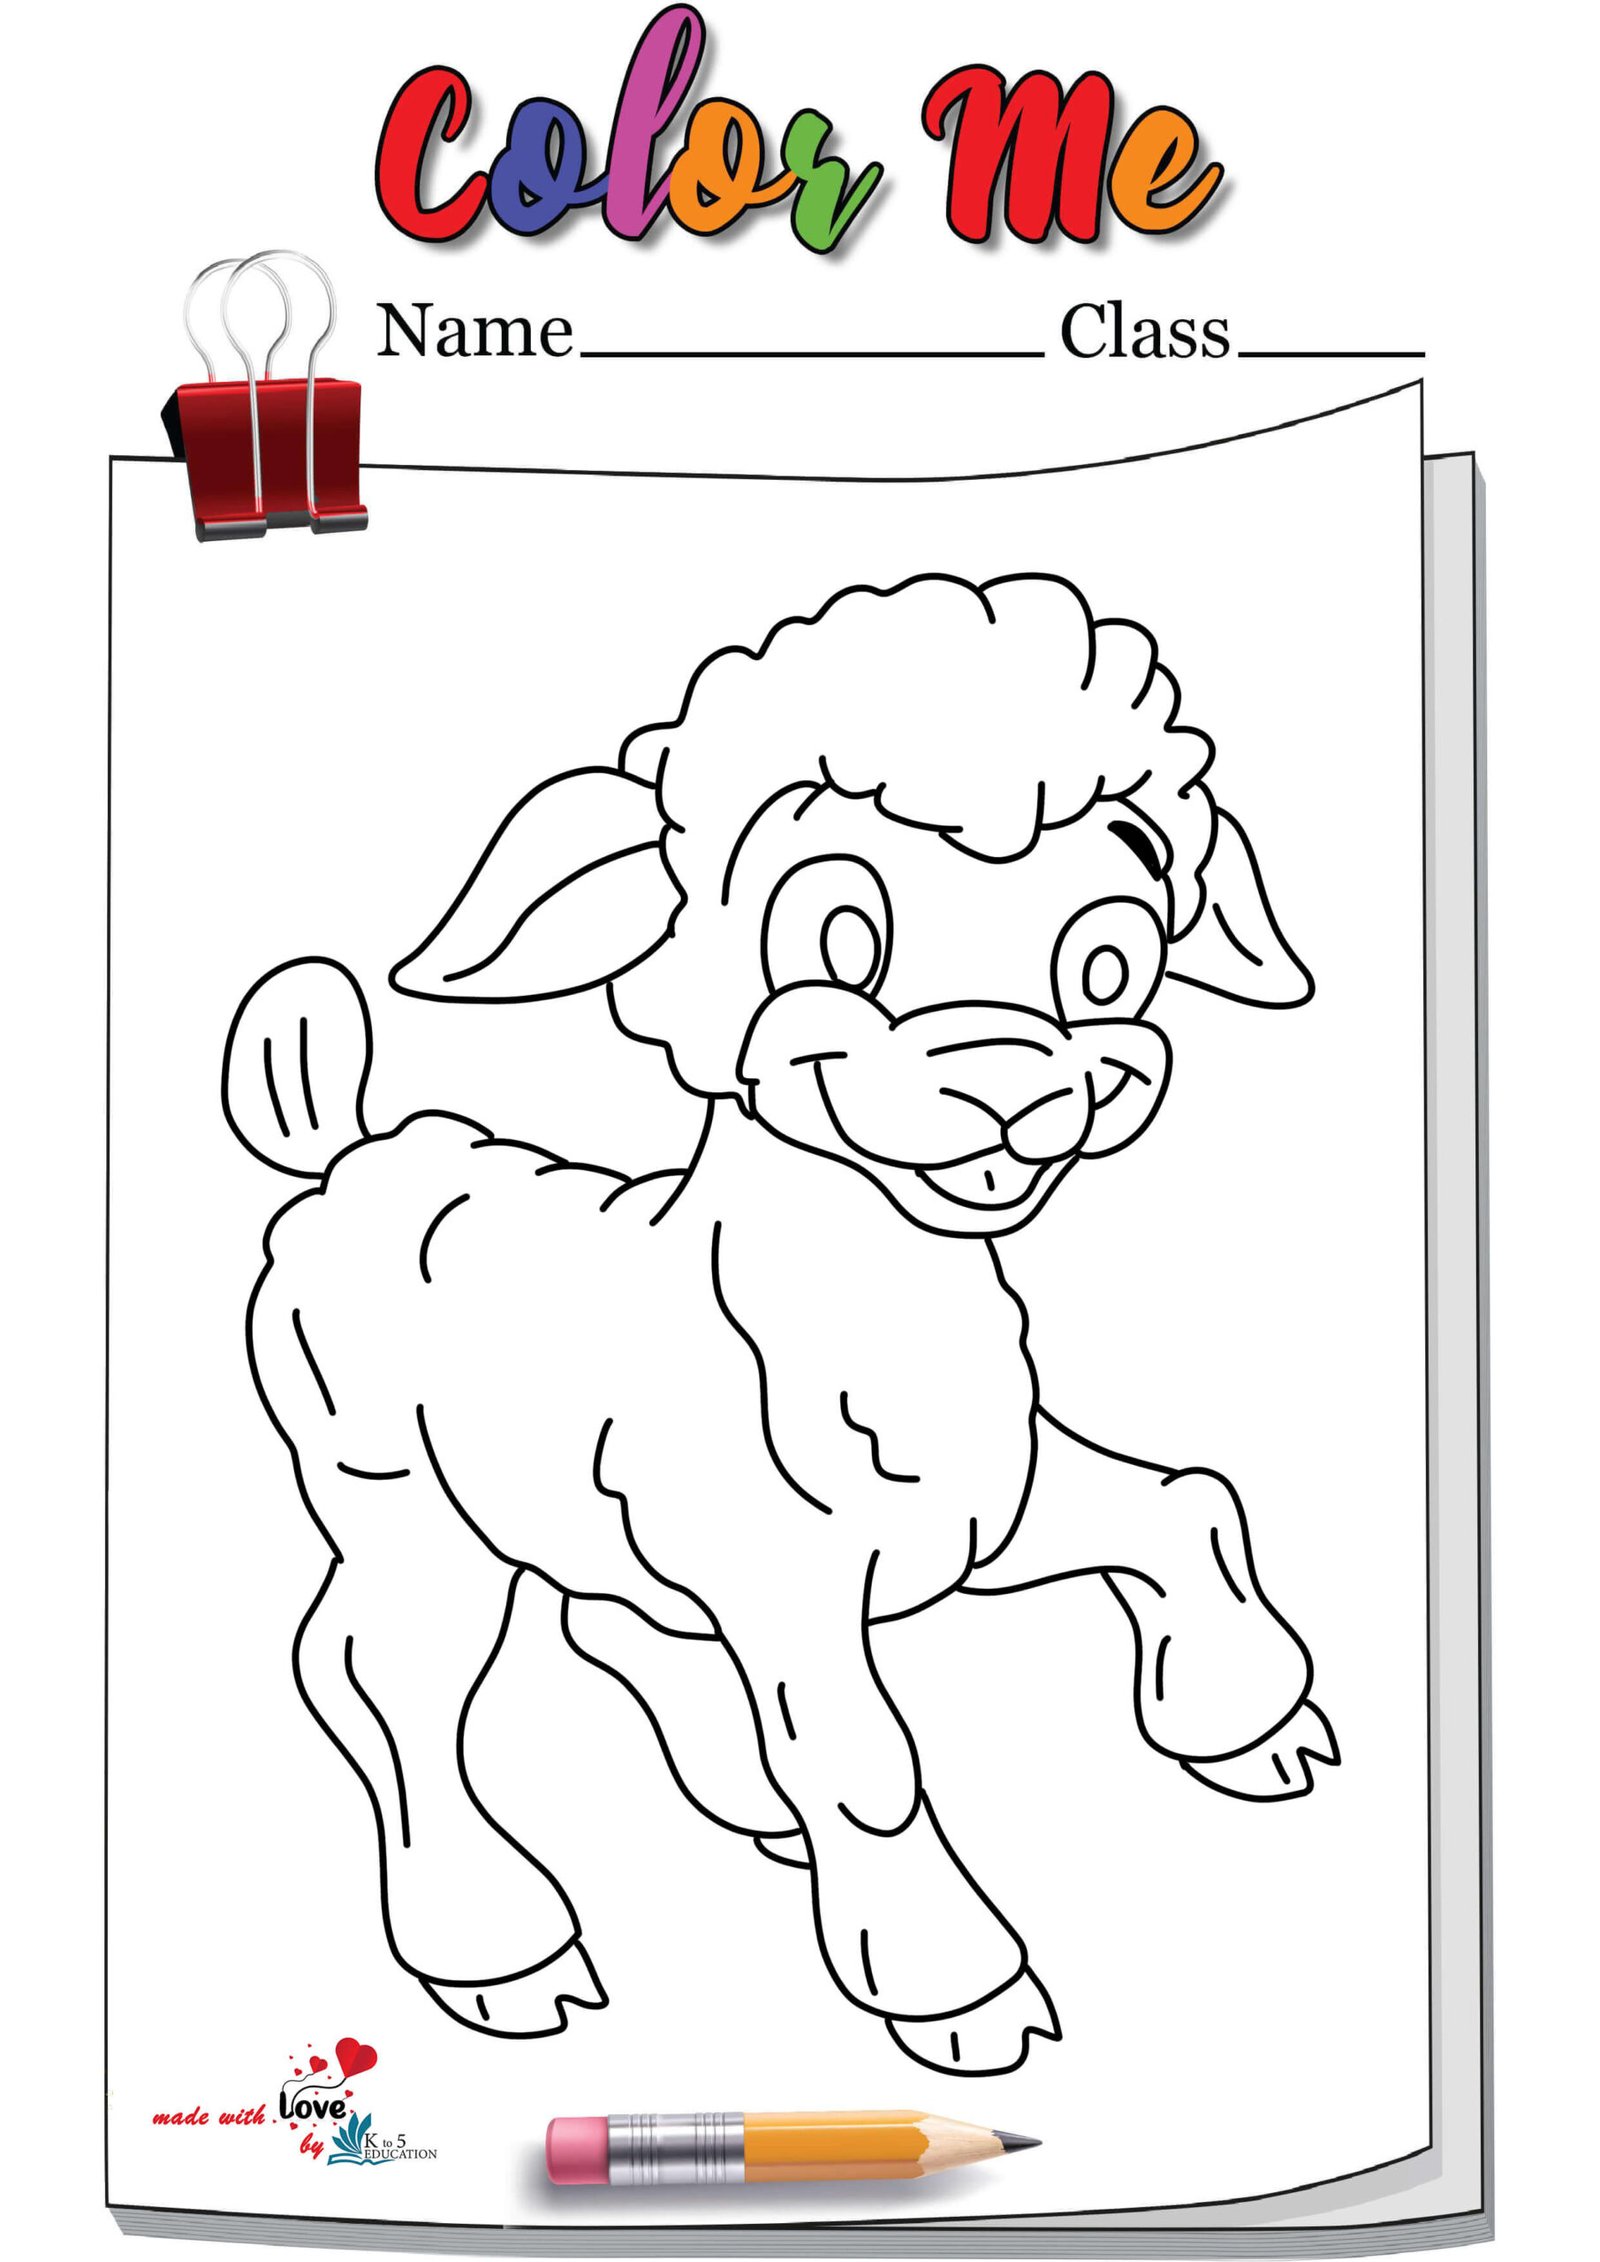 Running Sheep Coloring Pages